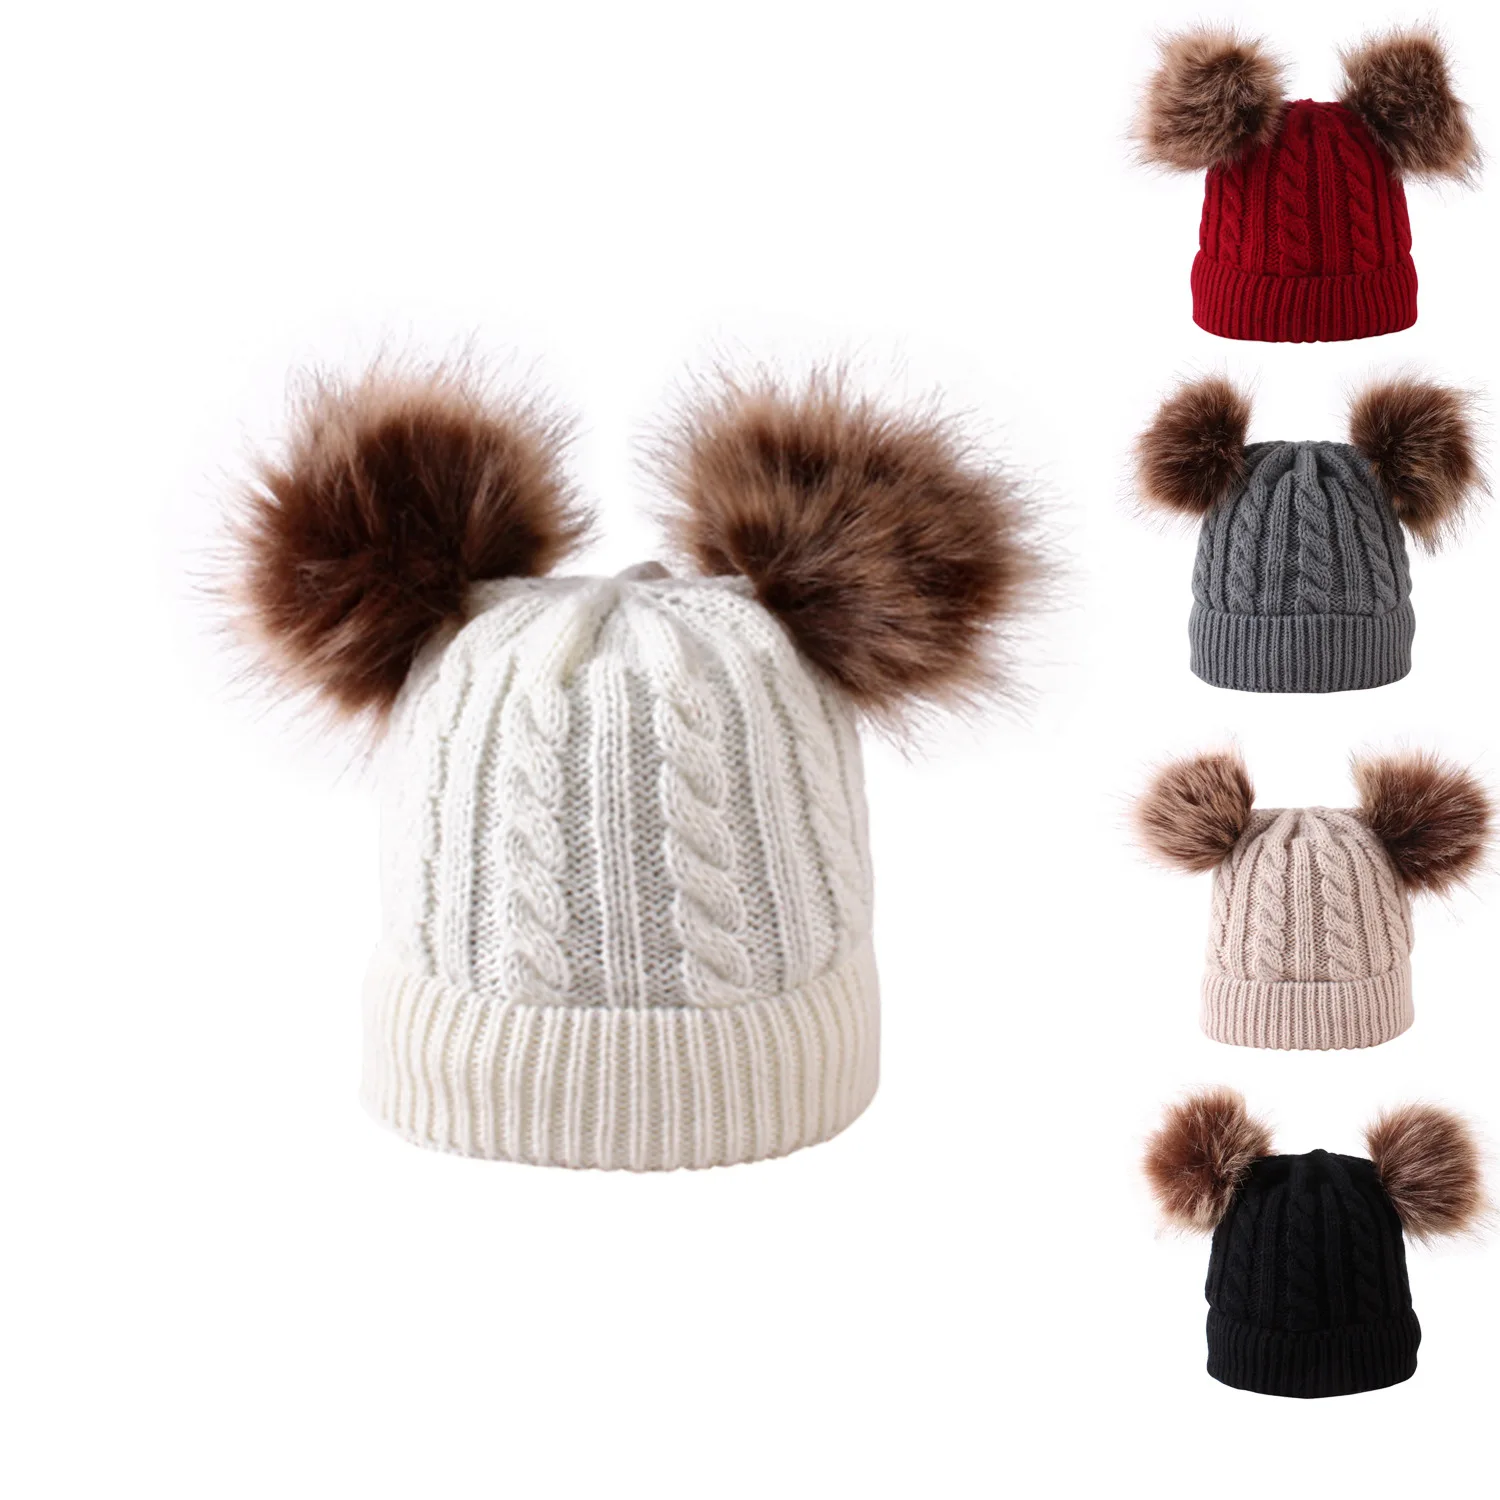 

NewWinter Unisex Artificial Plush Pompom Cap Scarf Children Boys Girls Knitted Baby Hats With Pompom Caps Children's Accessories